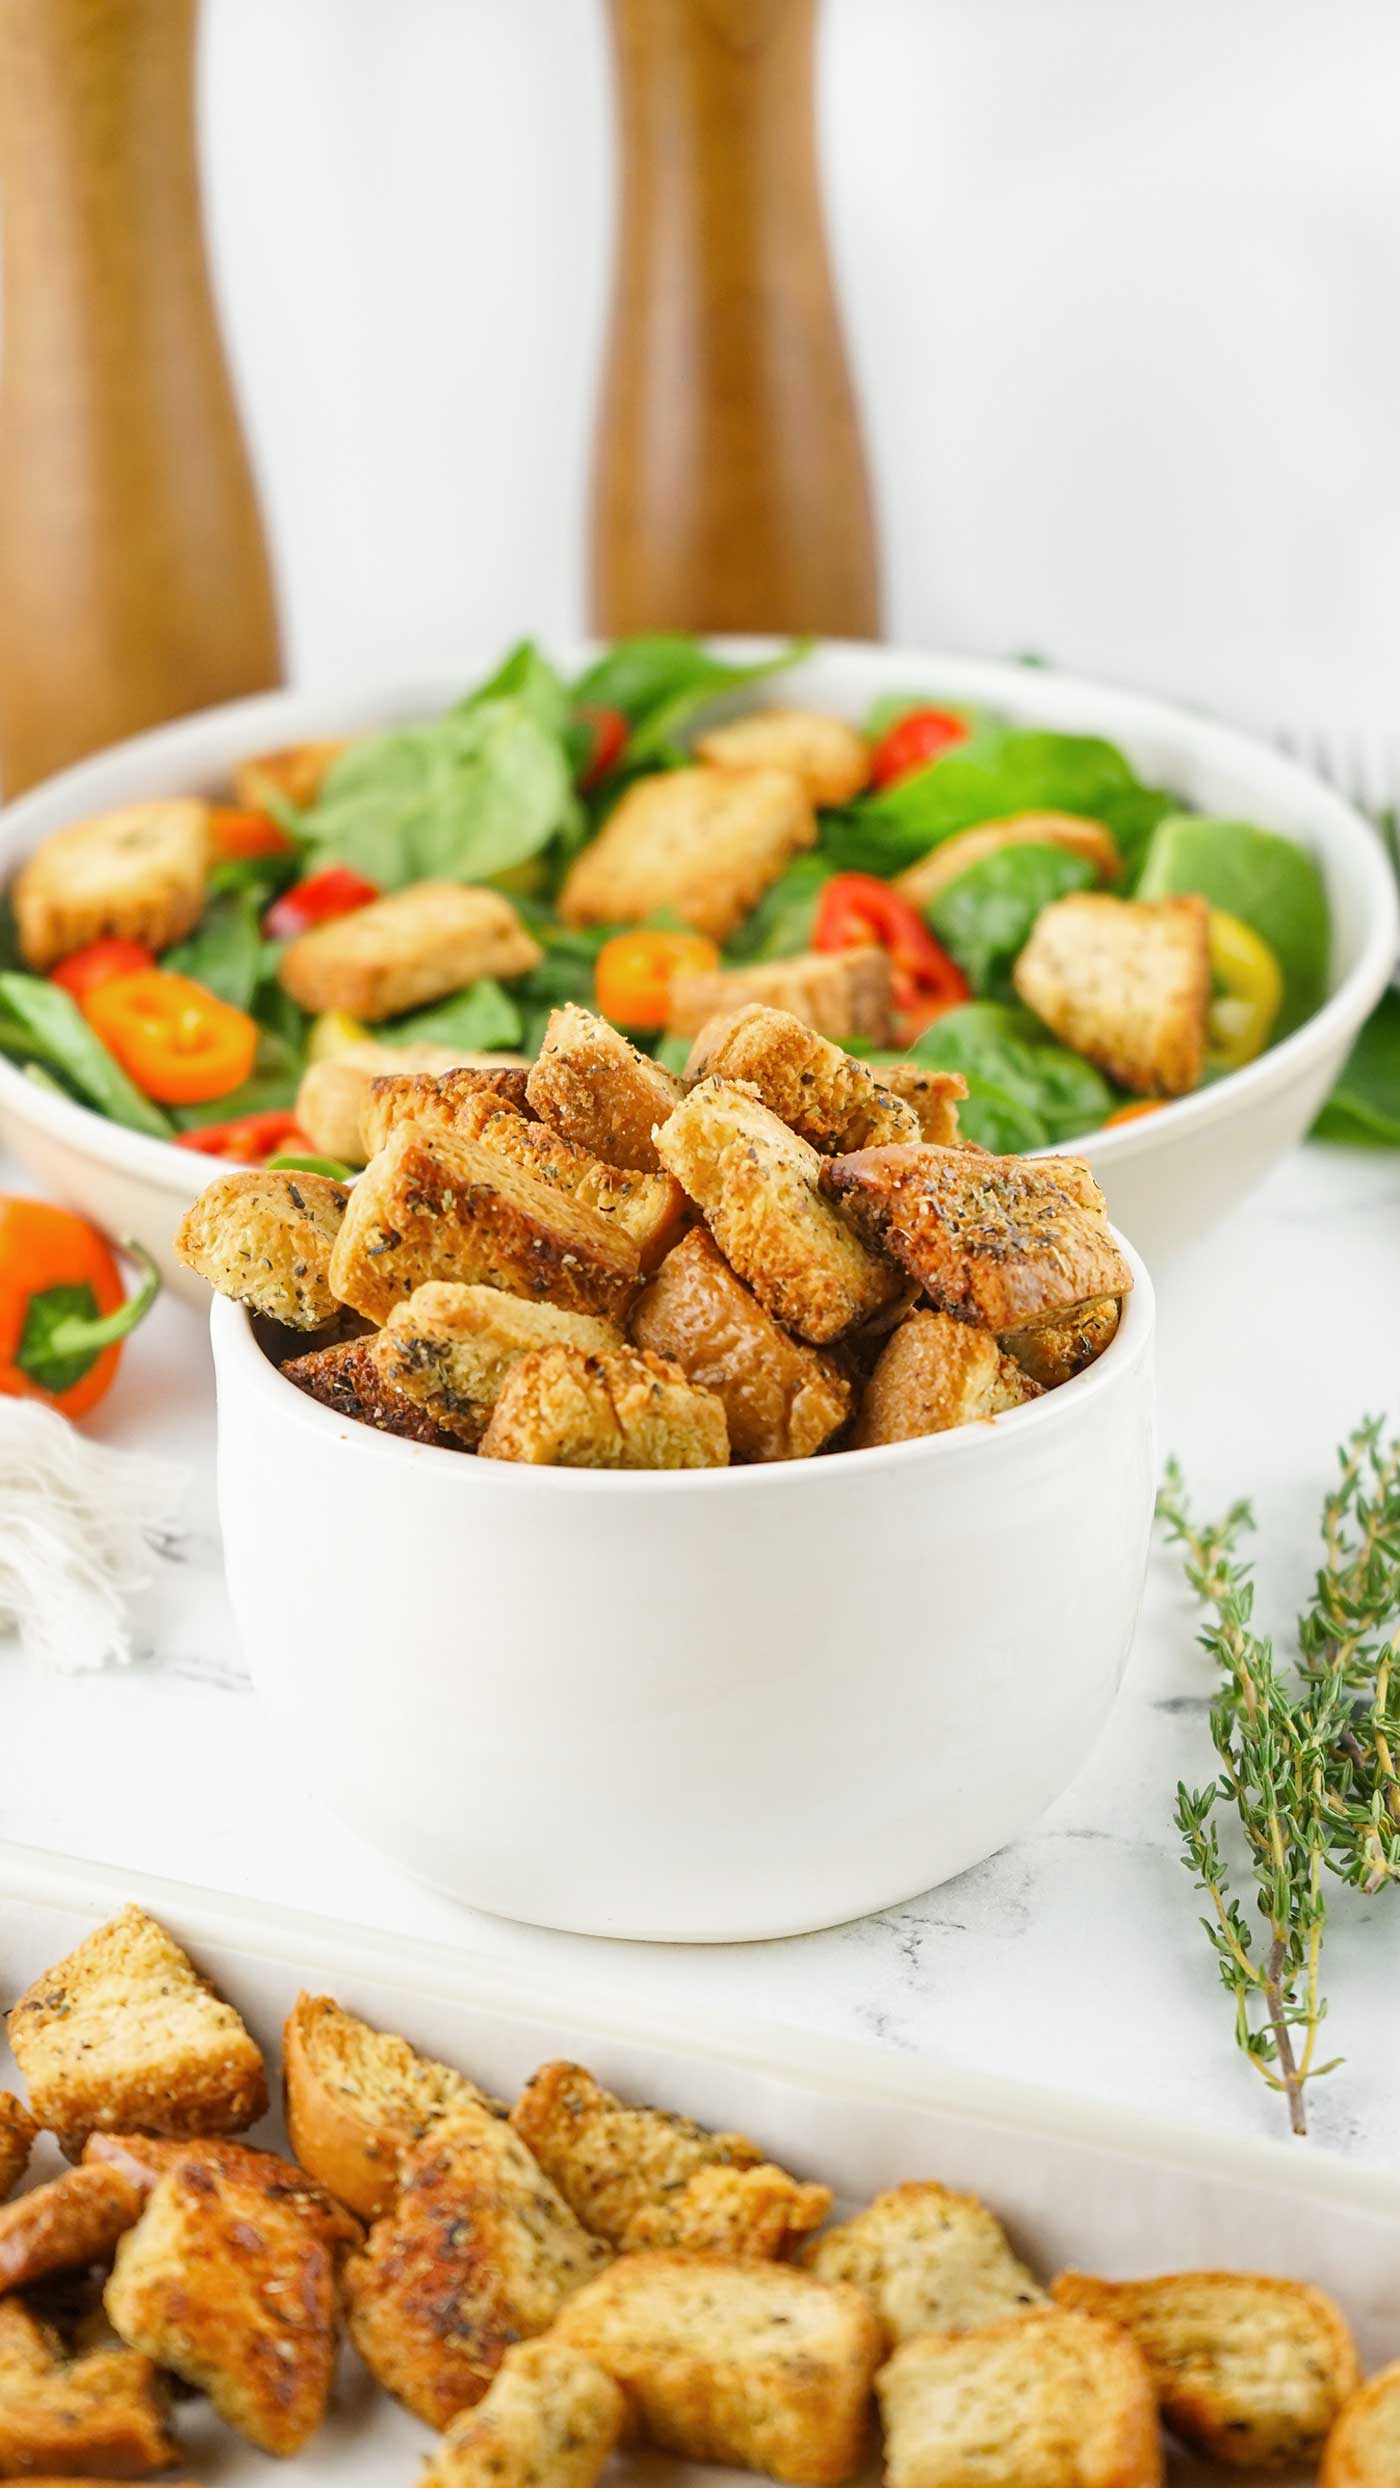 Homemade Croutons in a bowl with a salad in the background